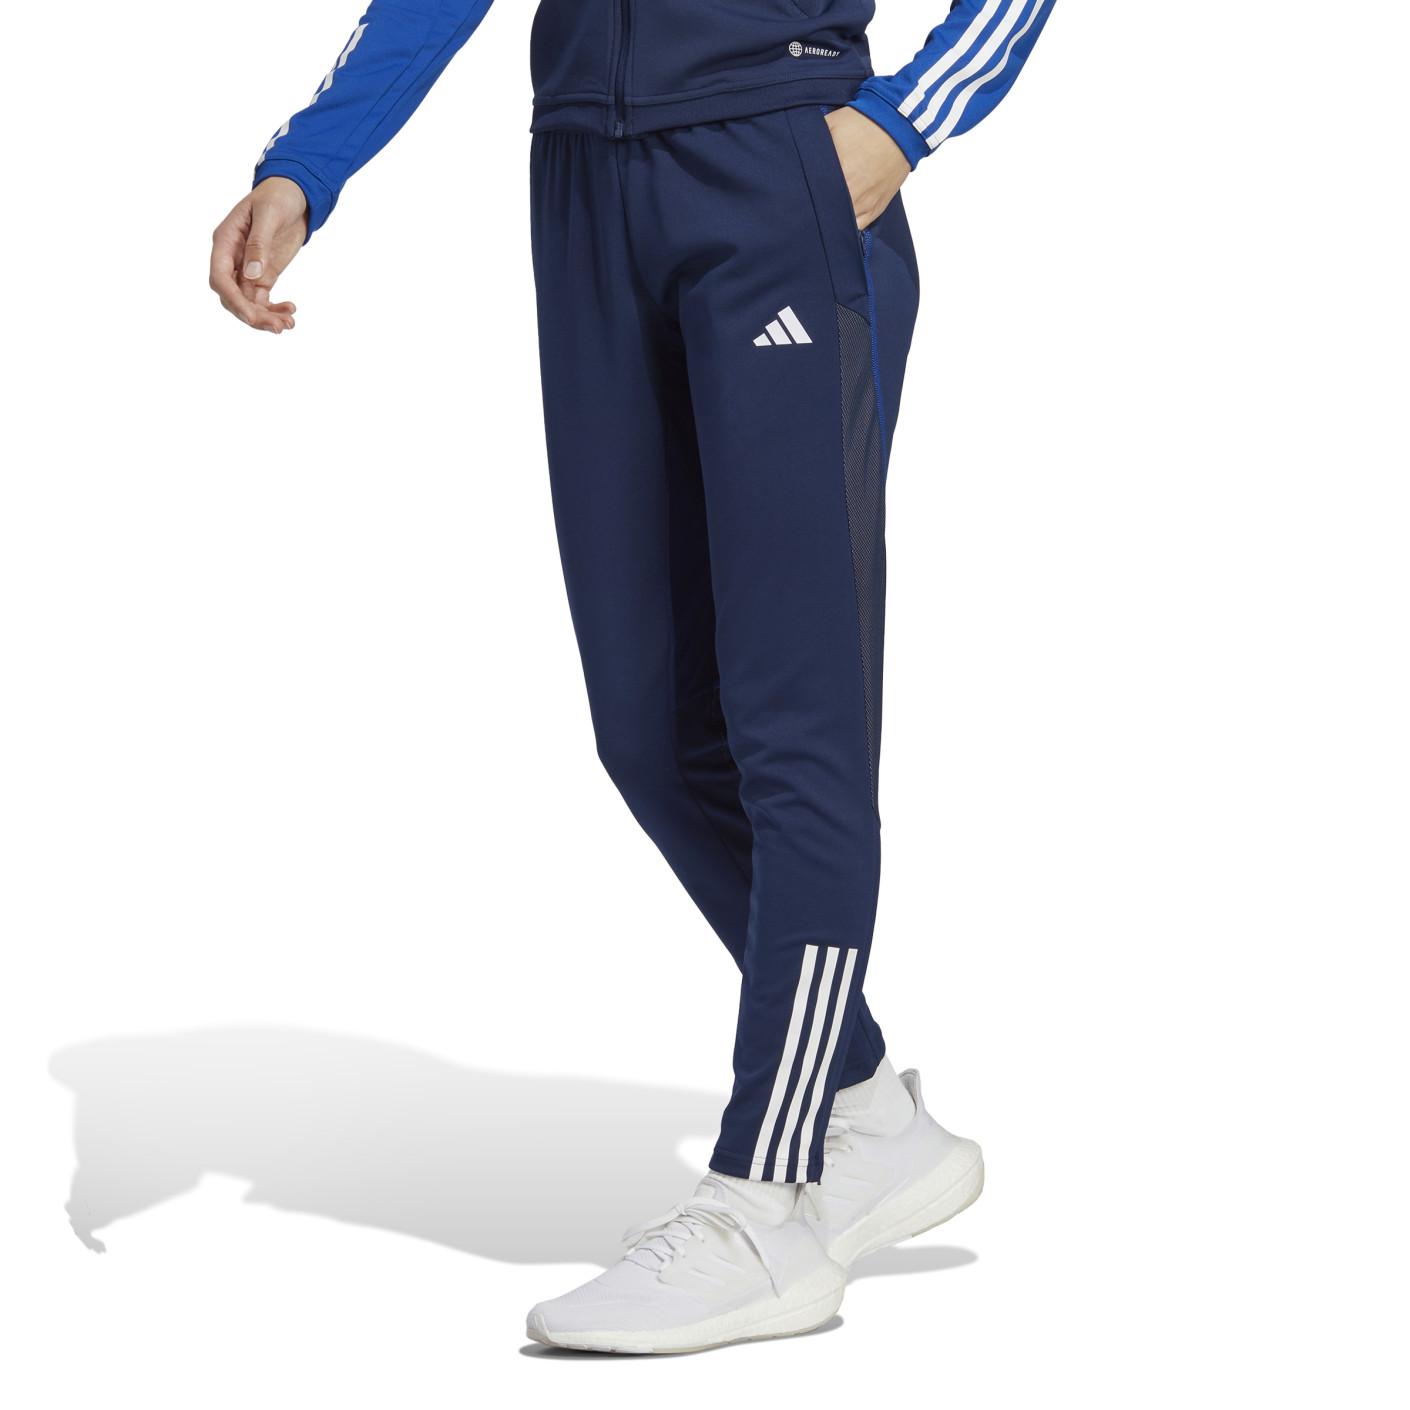 Rationeel pomp Absorberend adidas Tiro 23 Competition Trainingsbroek Dames Donkerblauw Wit